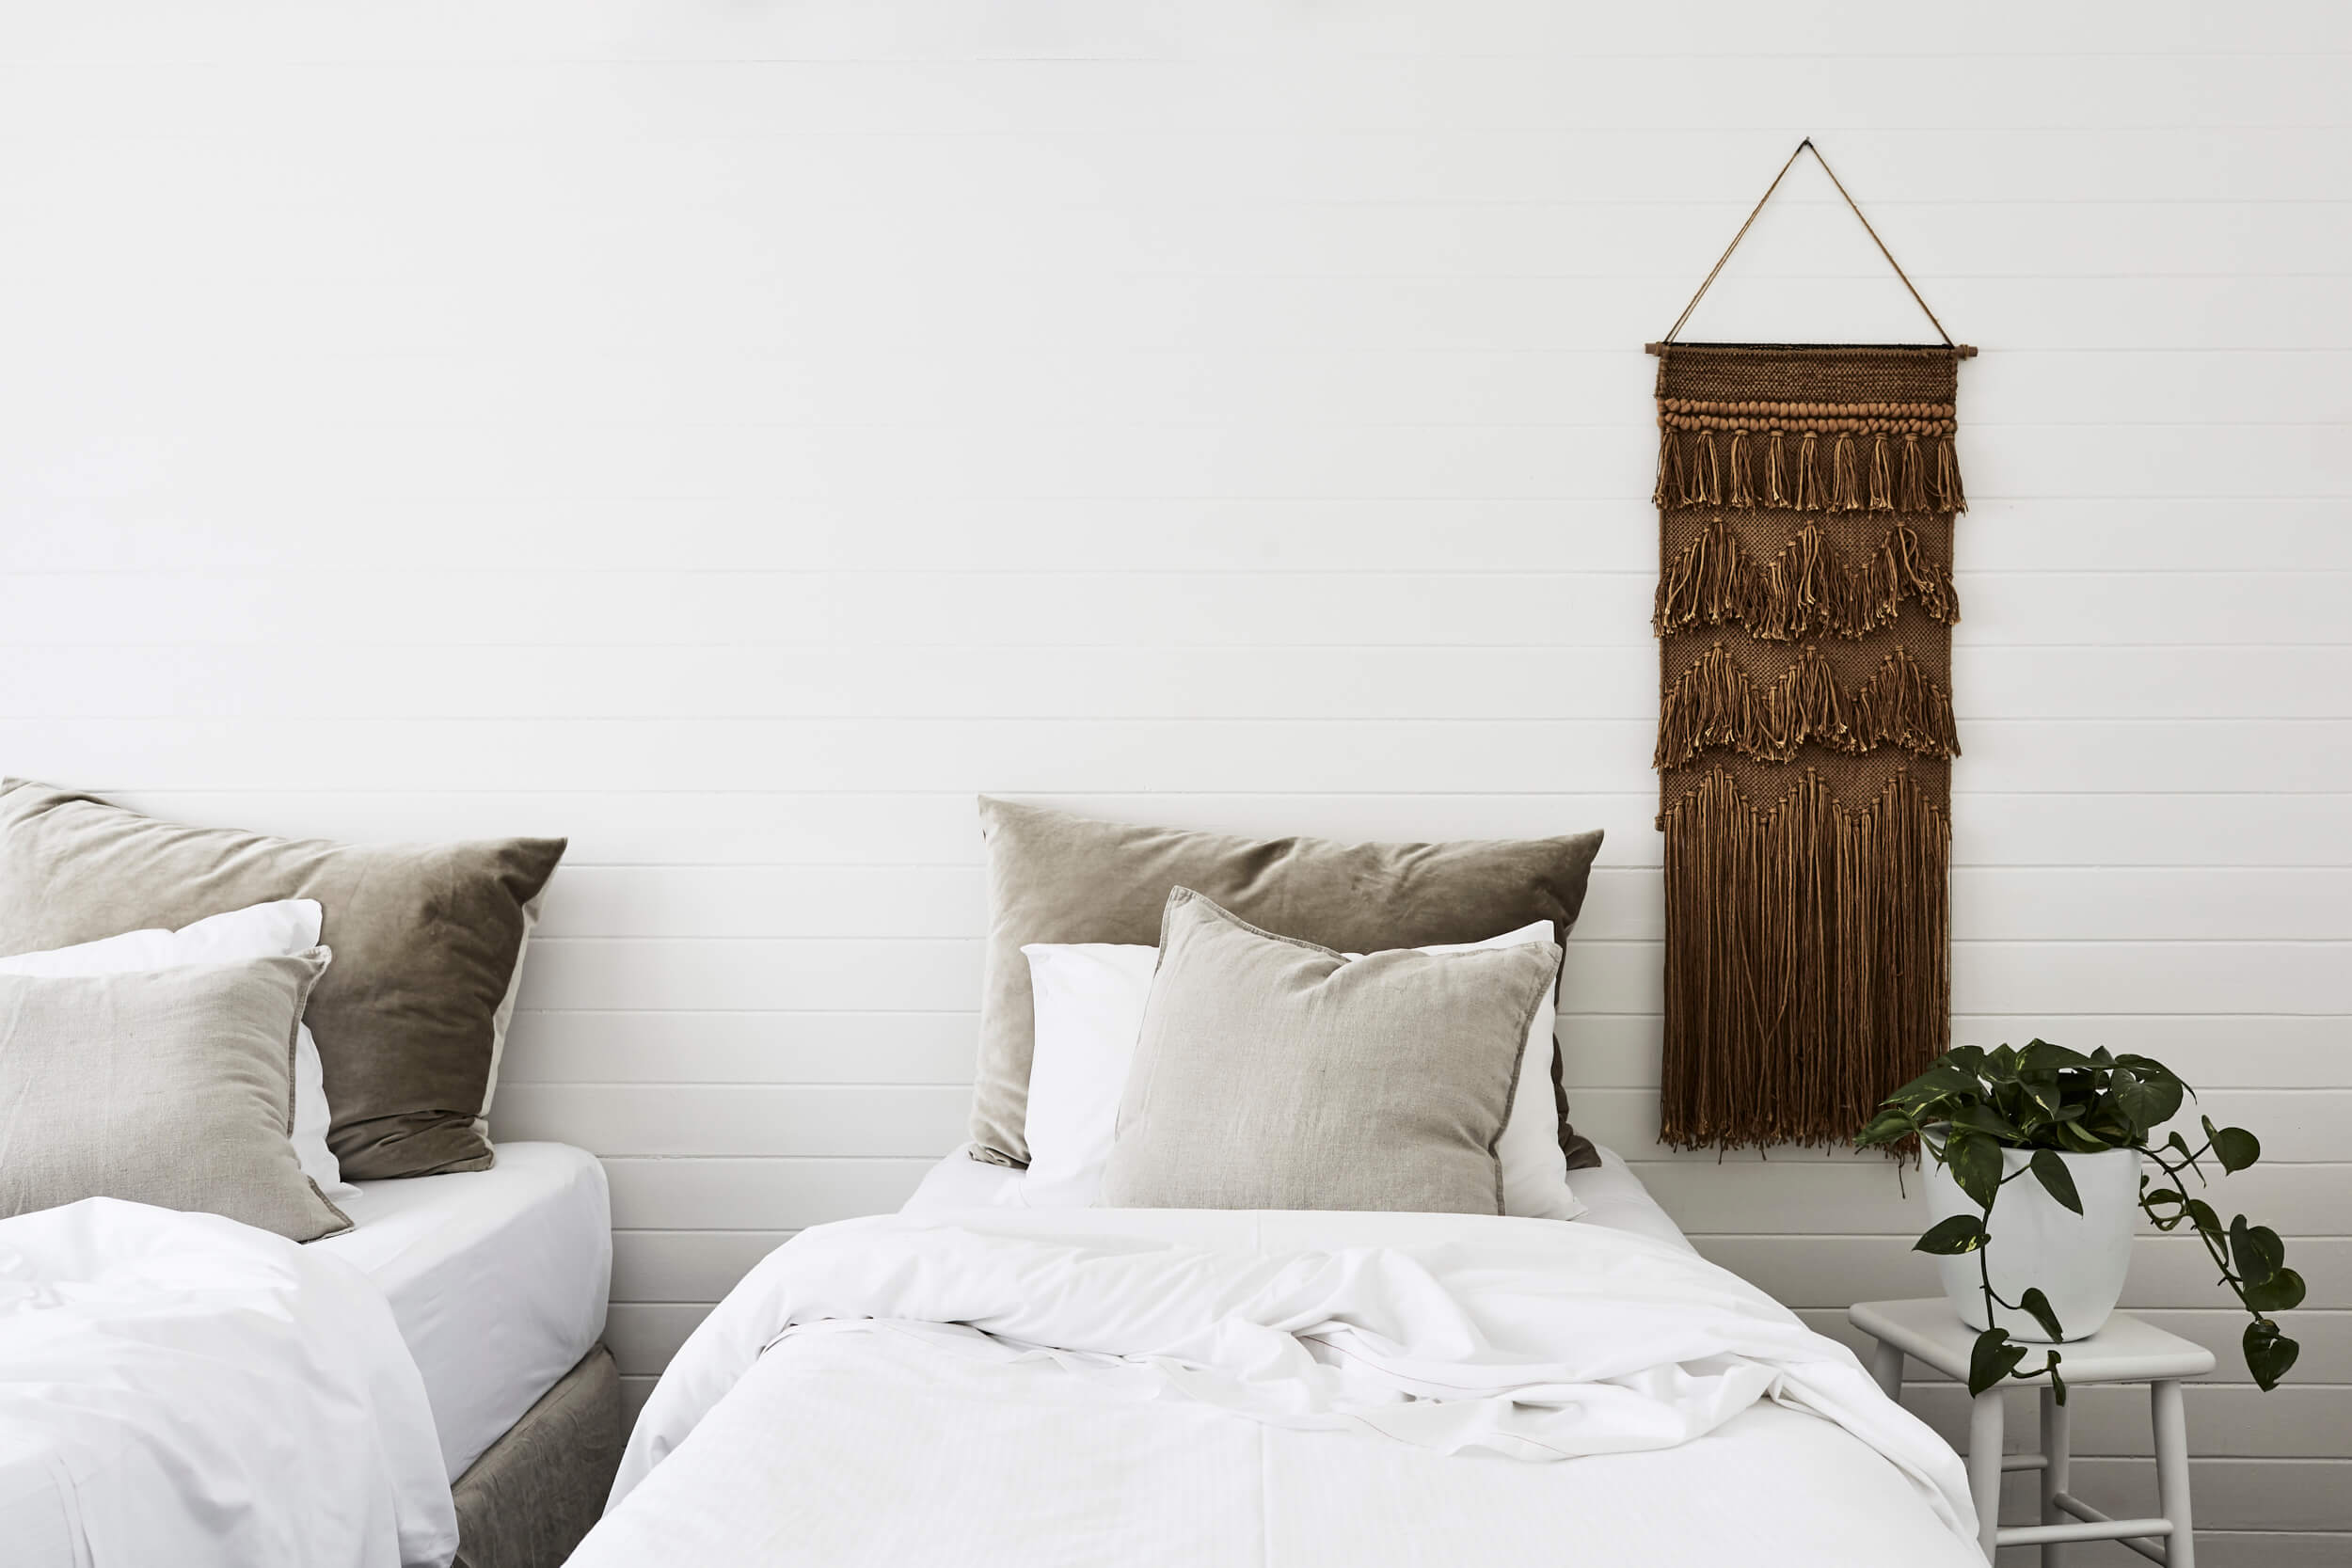 Bedroom at The Cottage, The Bower Byron Bay with woven wall hanging and beds with muted colour linens